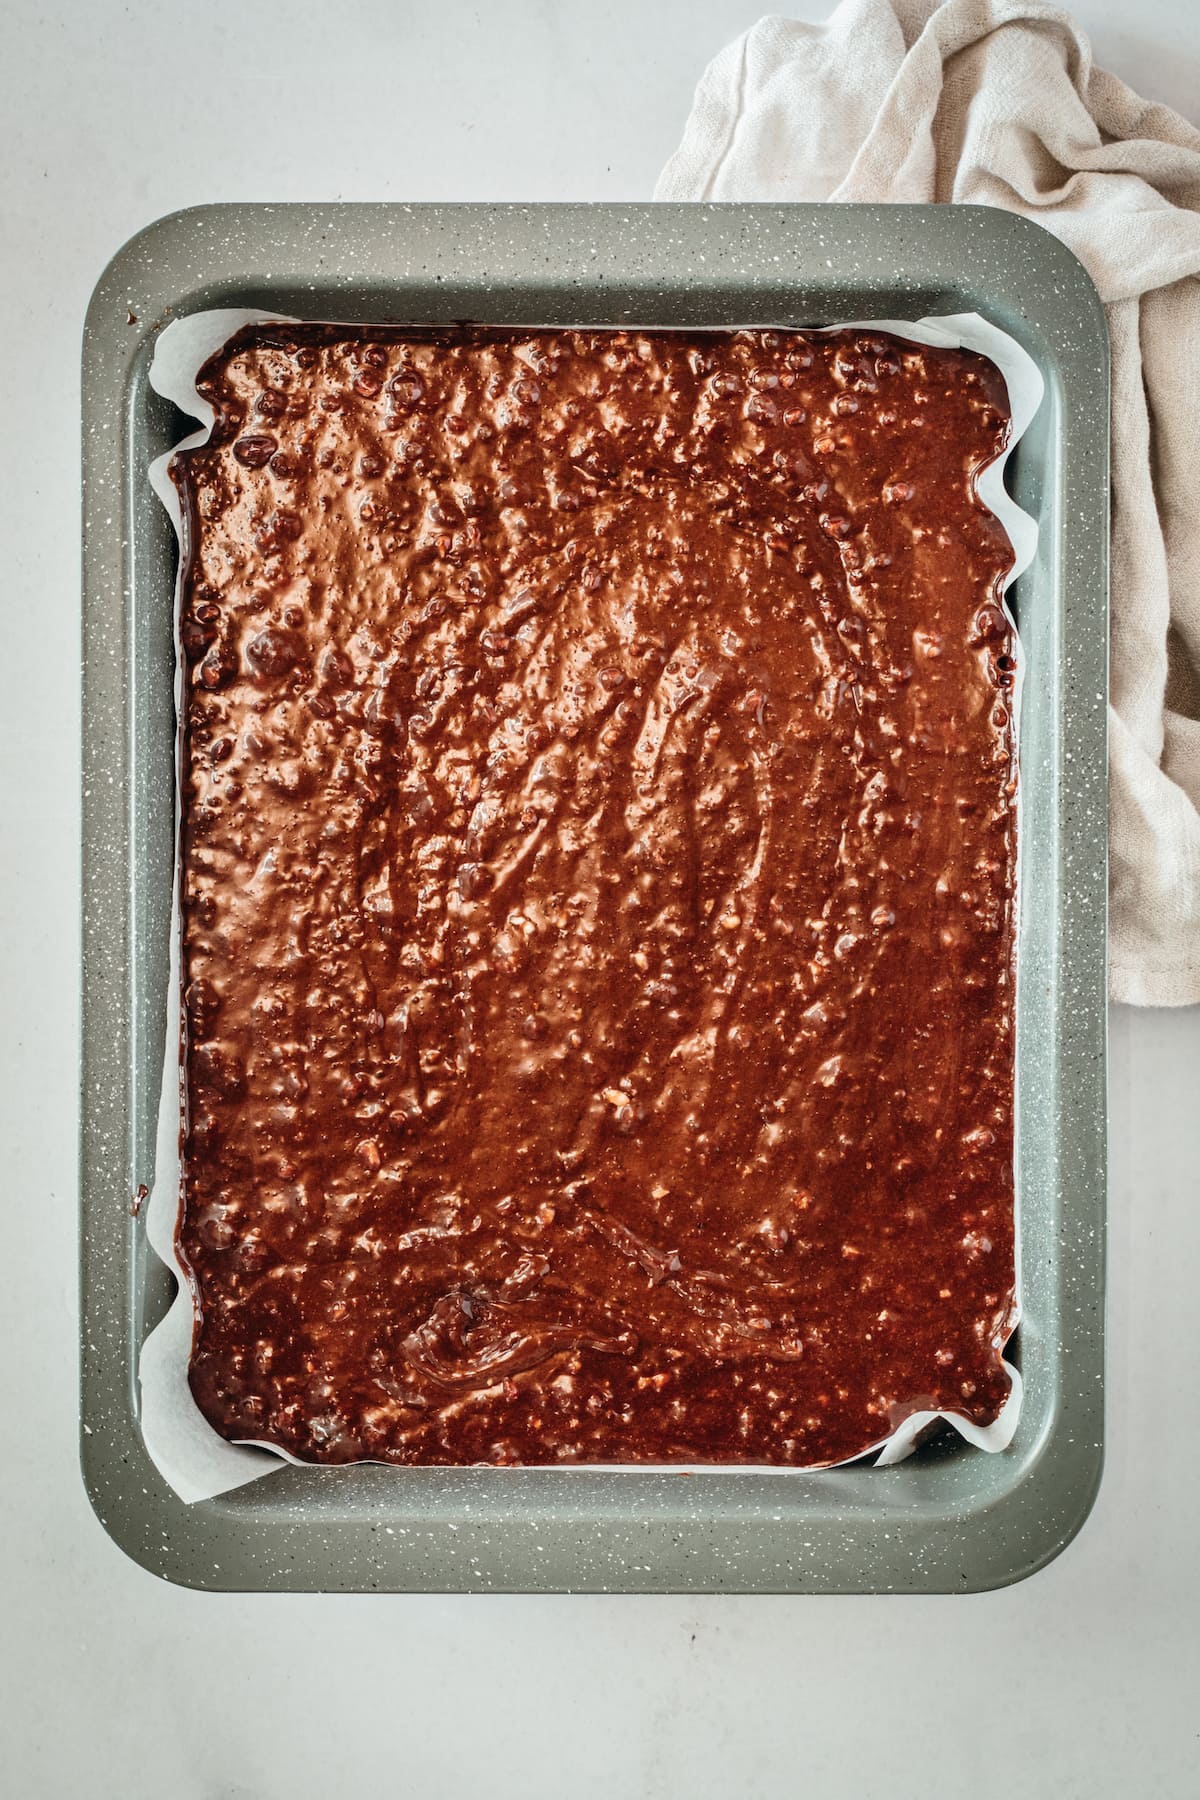 Overhead view of brownie batter in parchment-lined pan